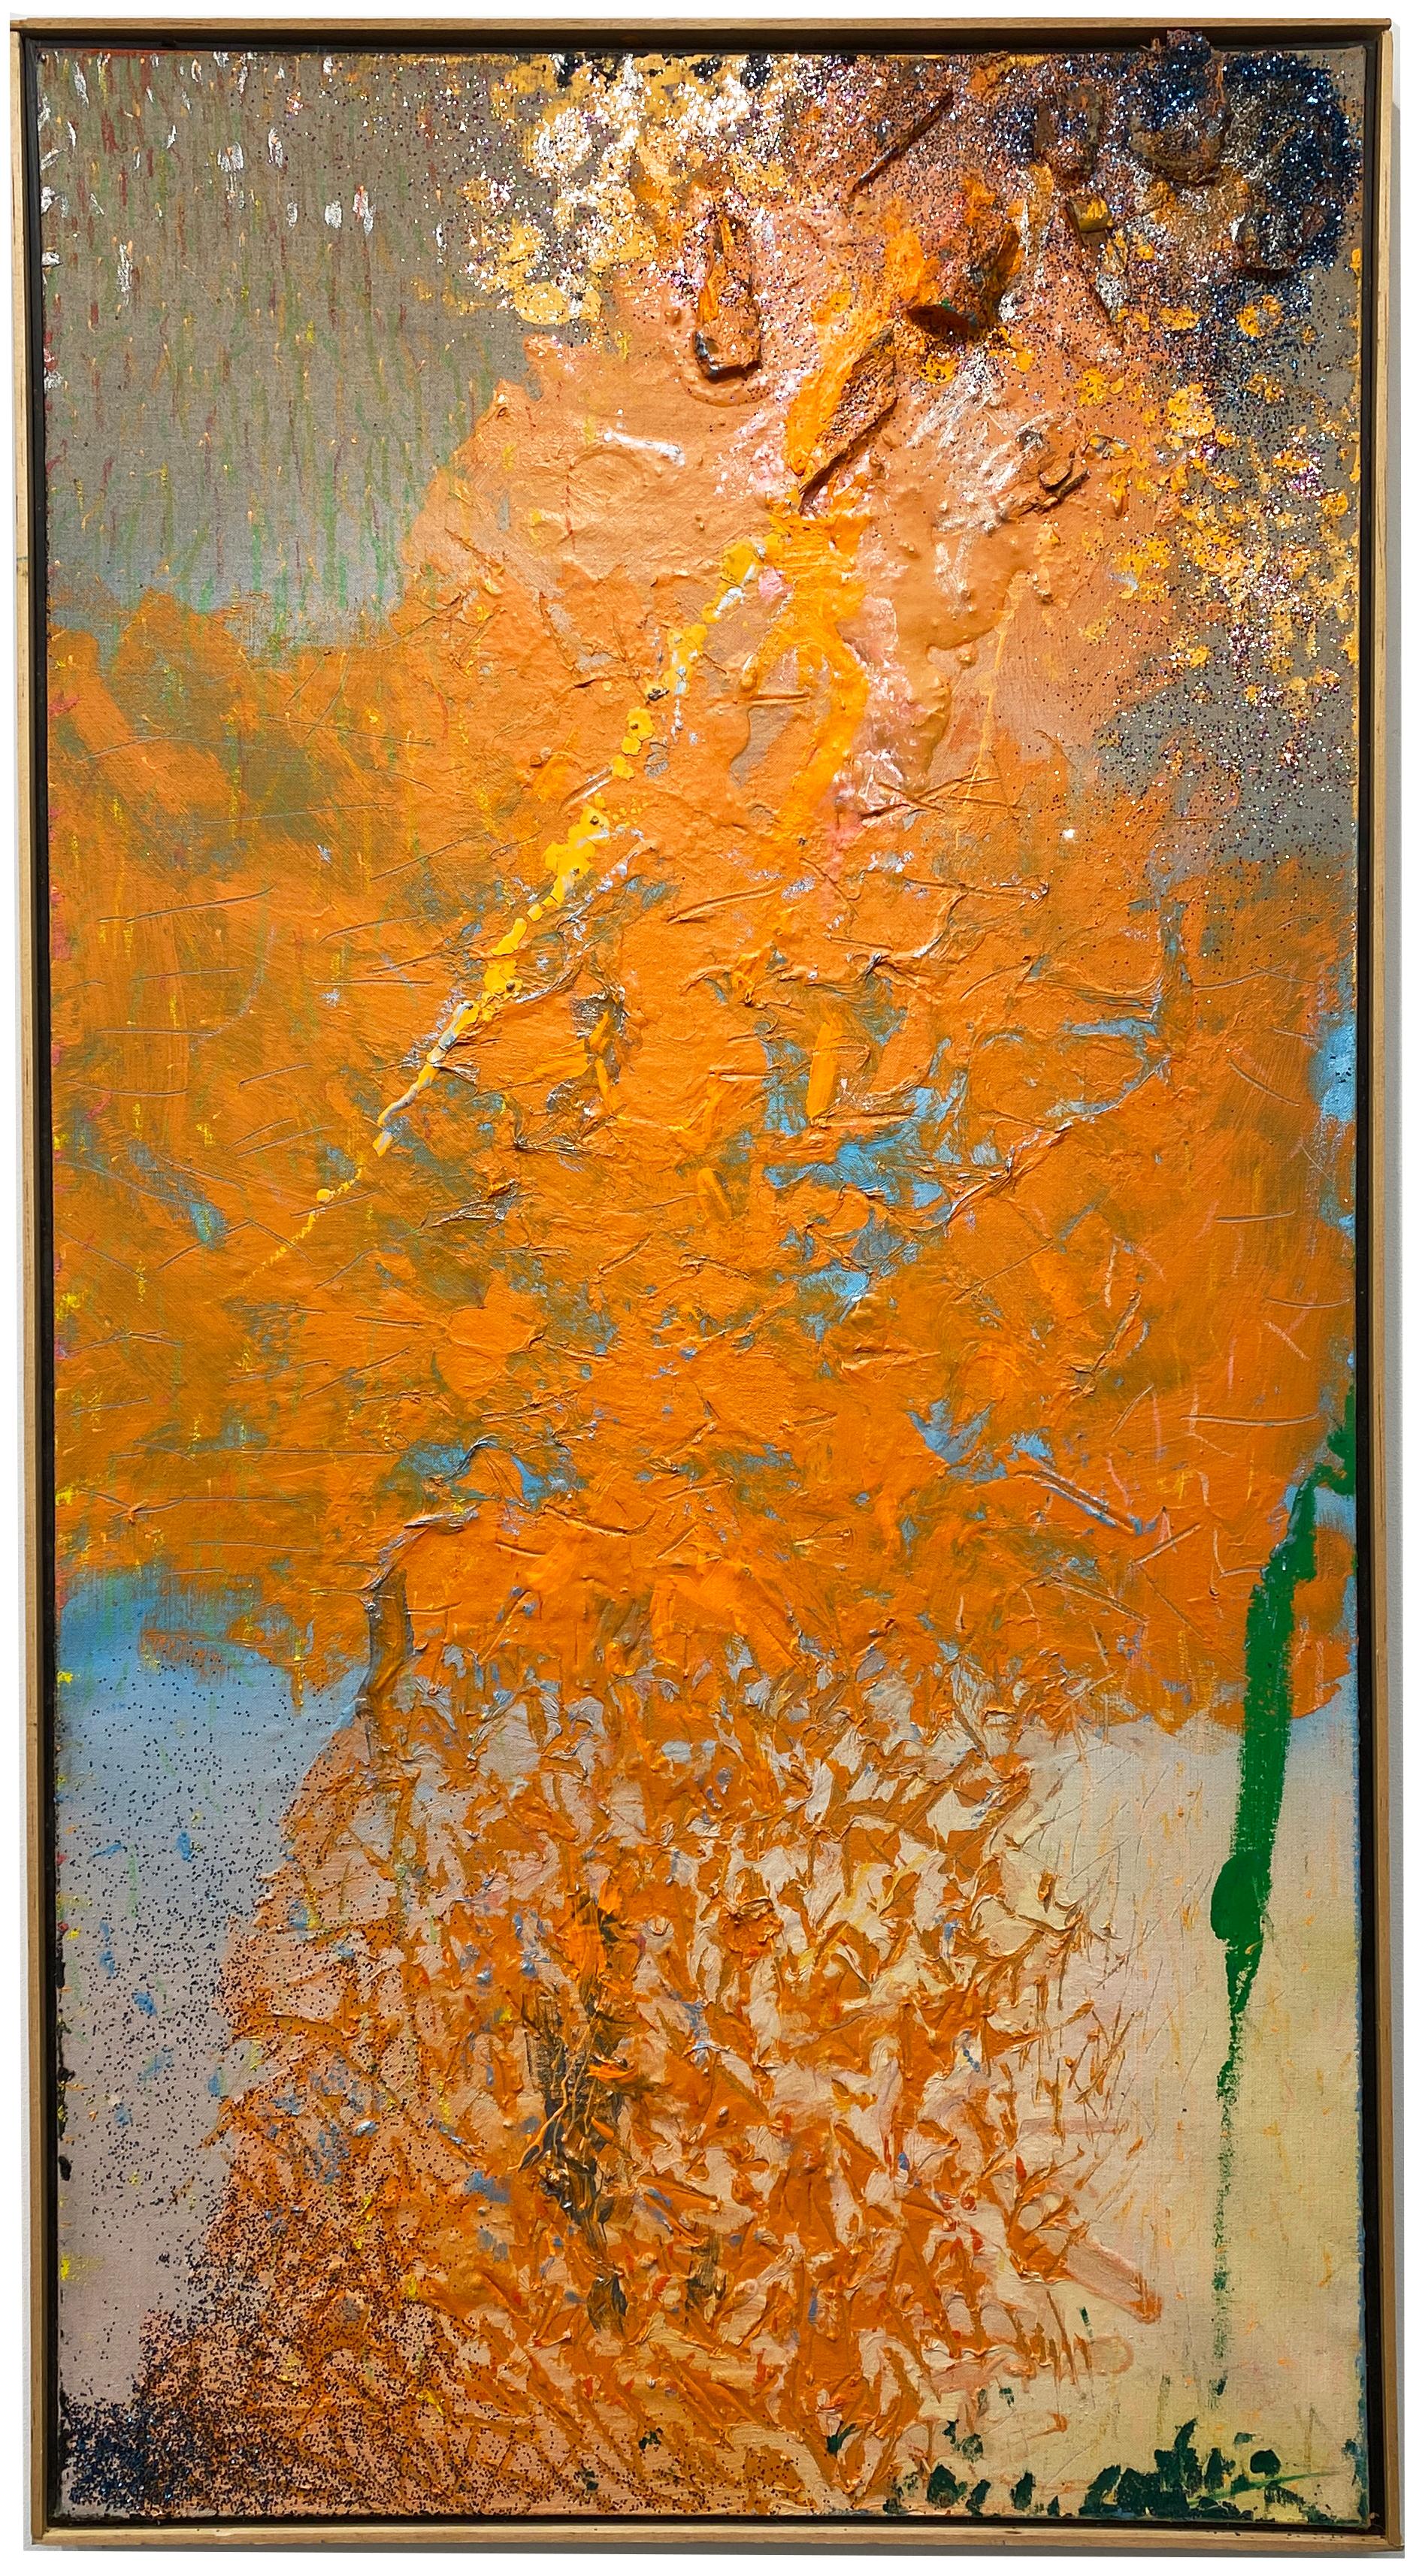 Available at Madelyn Jordon Fine Art. 'Pindewegunglasgemut' by Stanley Boxer, 1994. Oil and mixed media on canvas, 50 x 26.75 in. / Frame: 51 x 27.75 in.  This painting has an active surface that is thickly painted with defined brush strokes in a